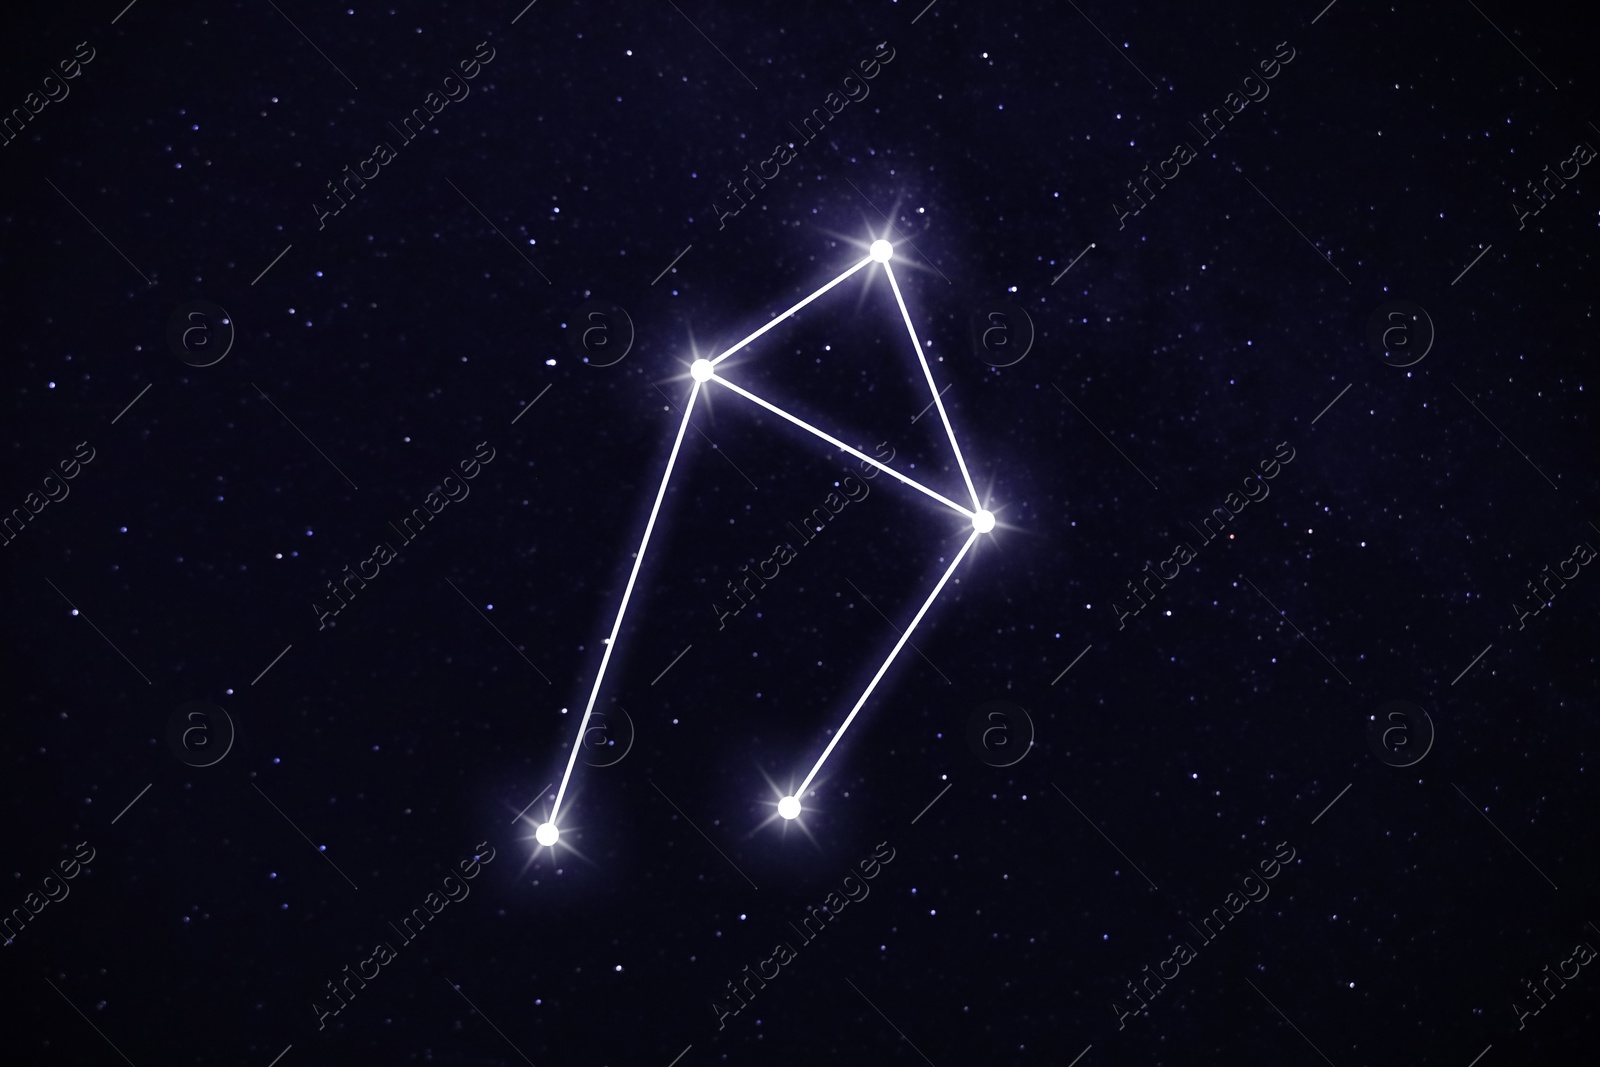 Image of Libra constellation. Stick figure pattern in starry night sky